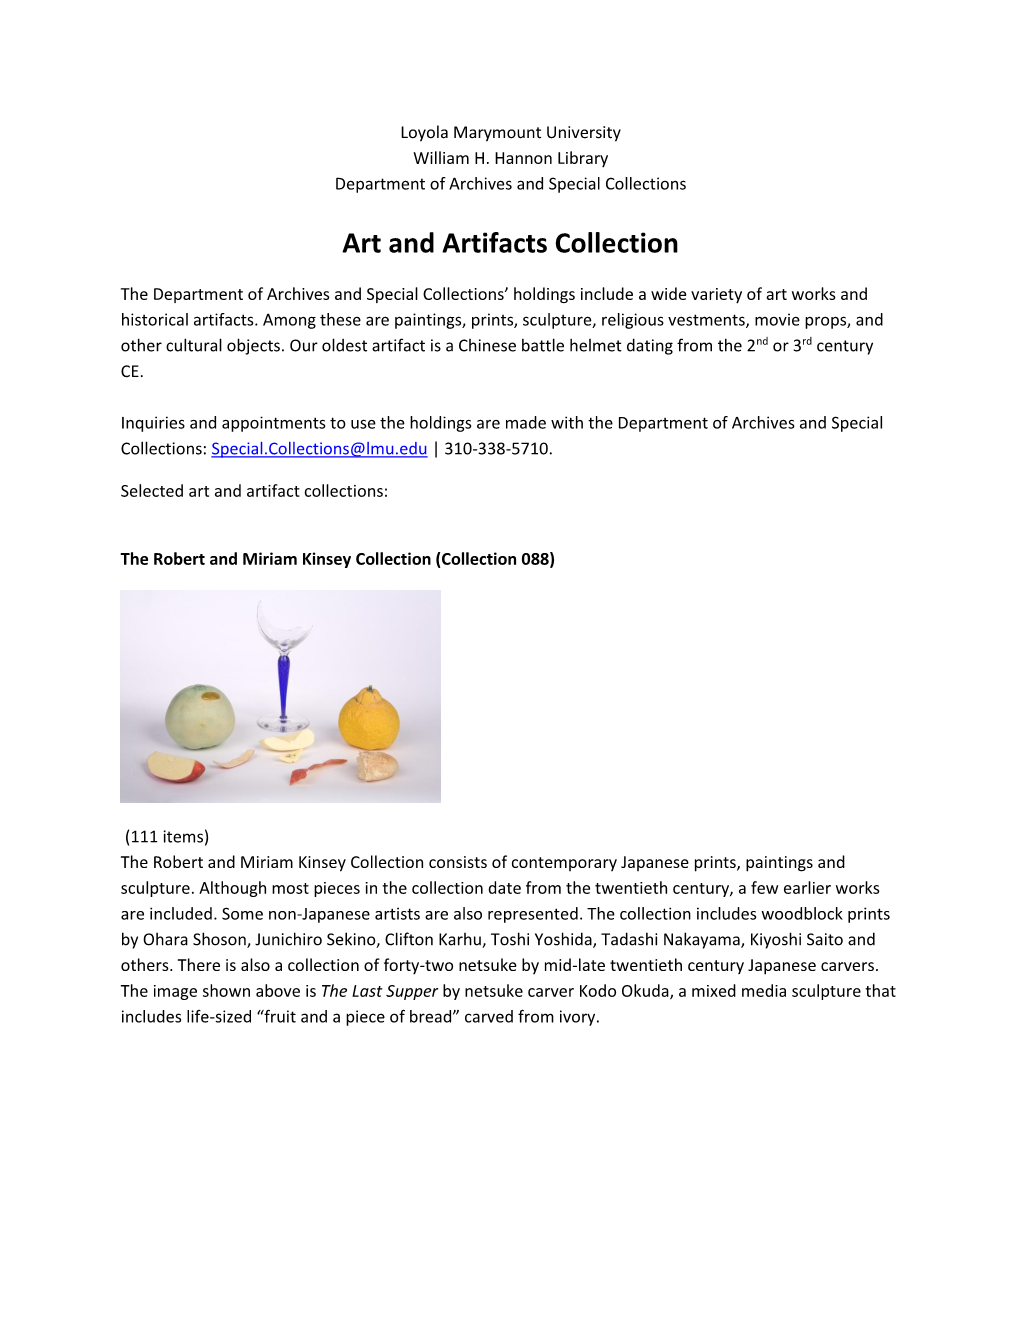 Art and Artifacts Collection